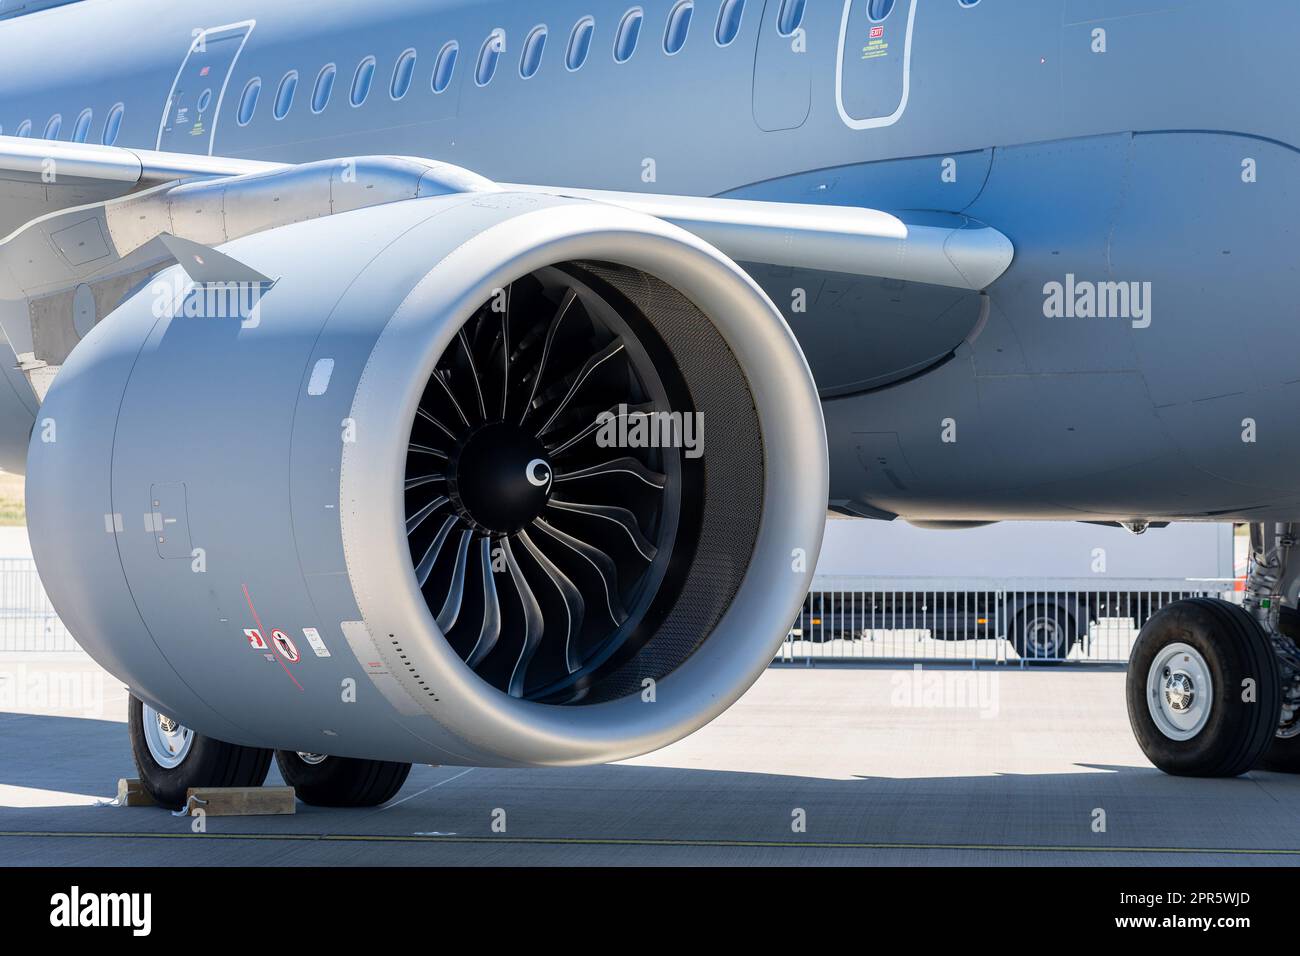 Jet engine, part of the wing and fuselage of a passenger aircraft. Stock Photo